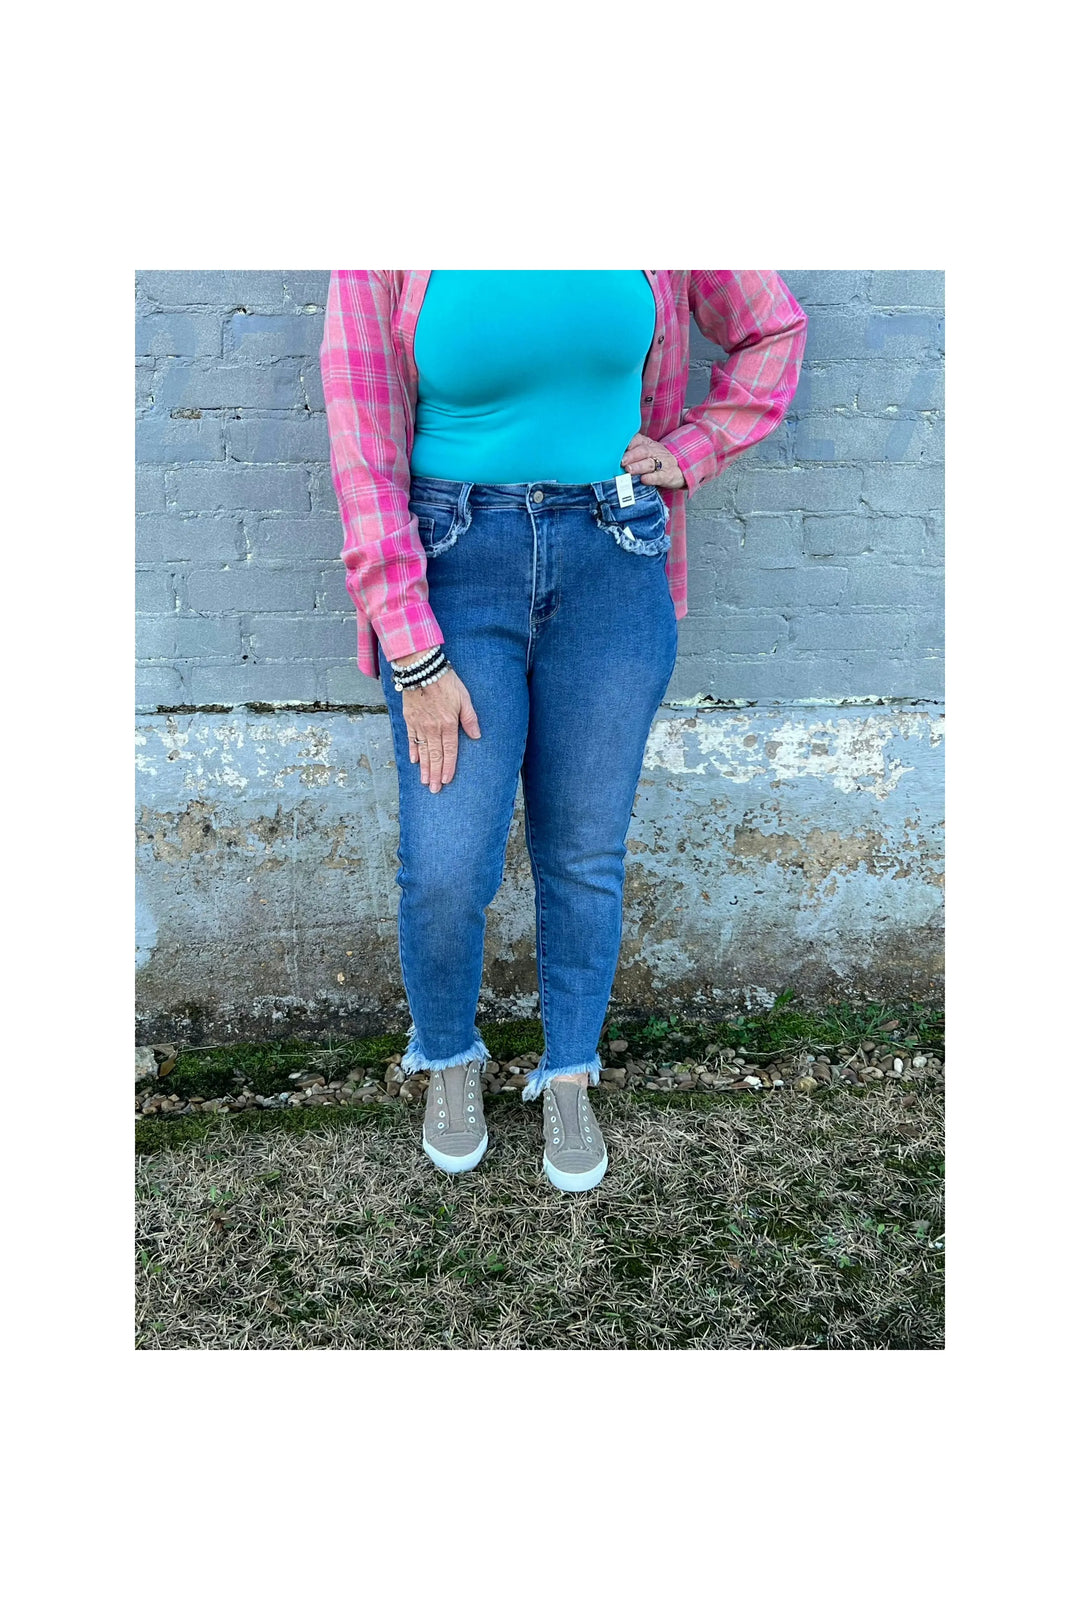 Judy Blue Amanda High Rise Frayed Pocket Slim Fit Jeans-Bottoms-Judy Blue-Vintage Dragonfly-Women’s Fashion Boutique Located in Sumrall, Mississippi